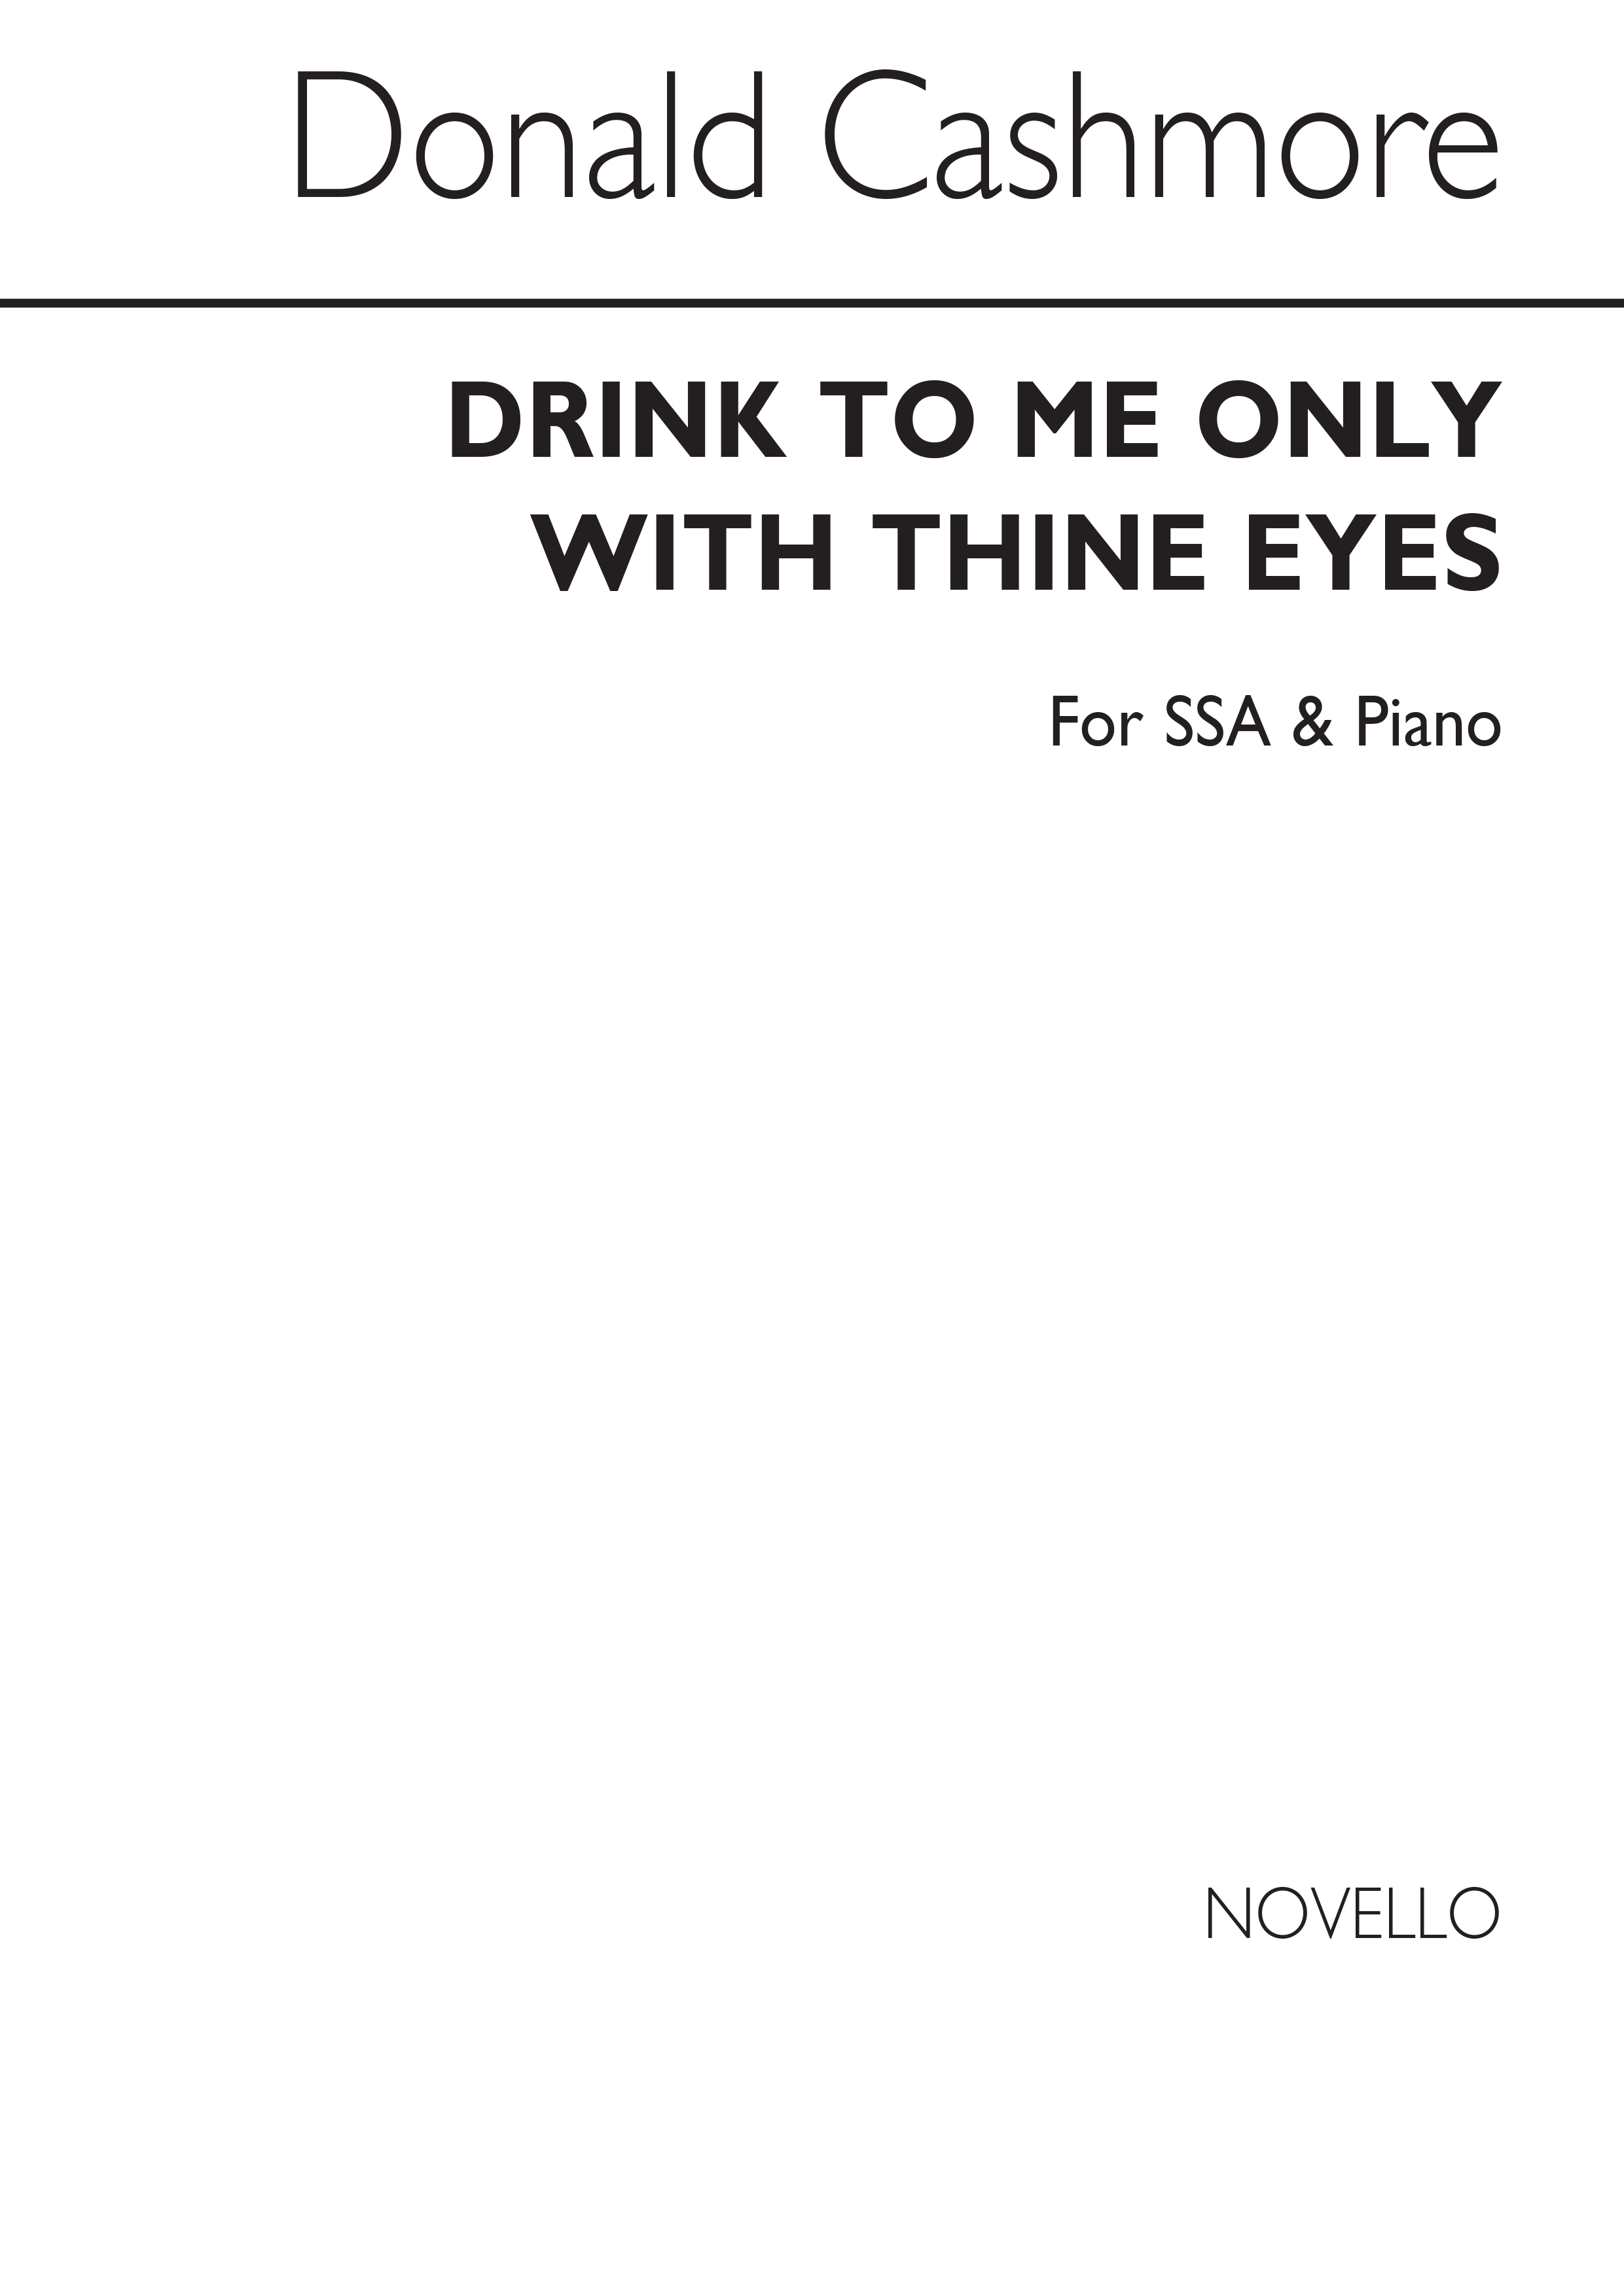 Donald Cashmore: Drink To Me Only With Thine Eyes (SSA/Piano)